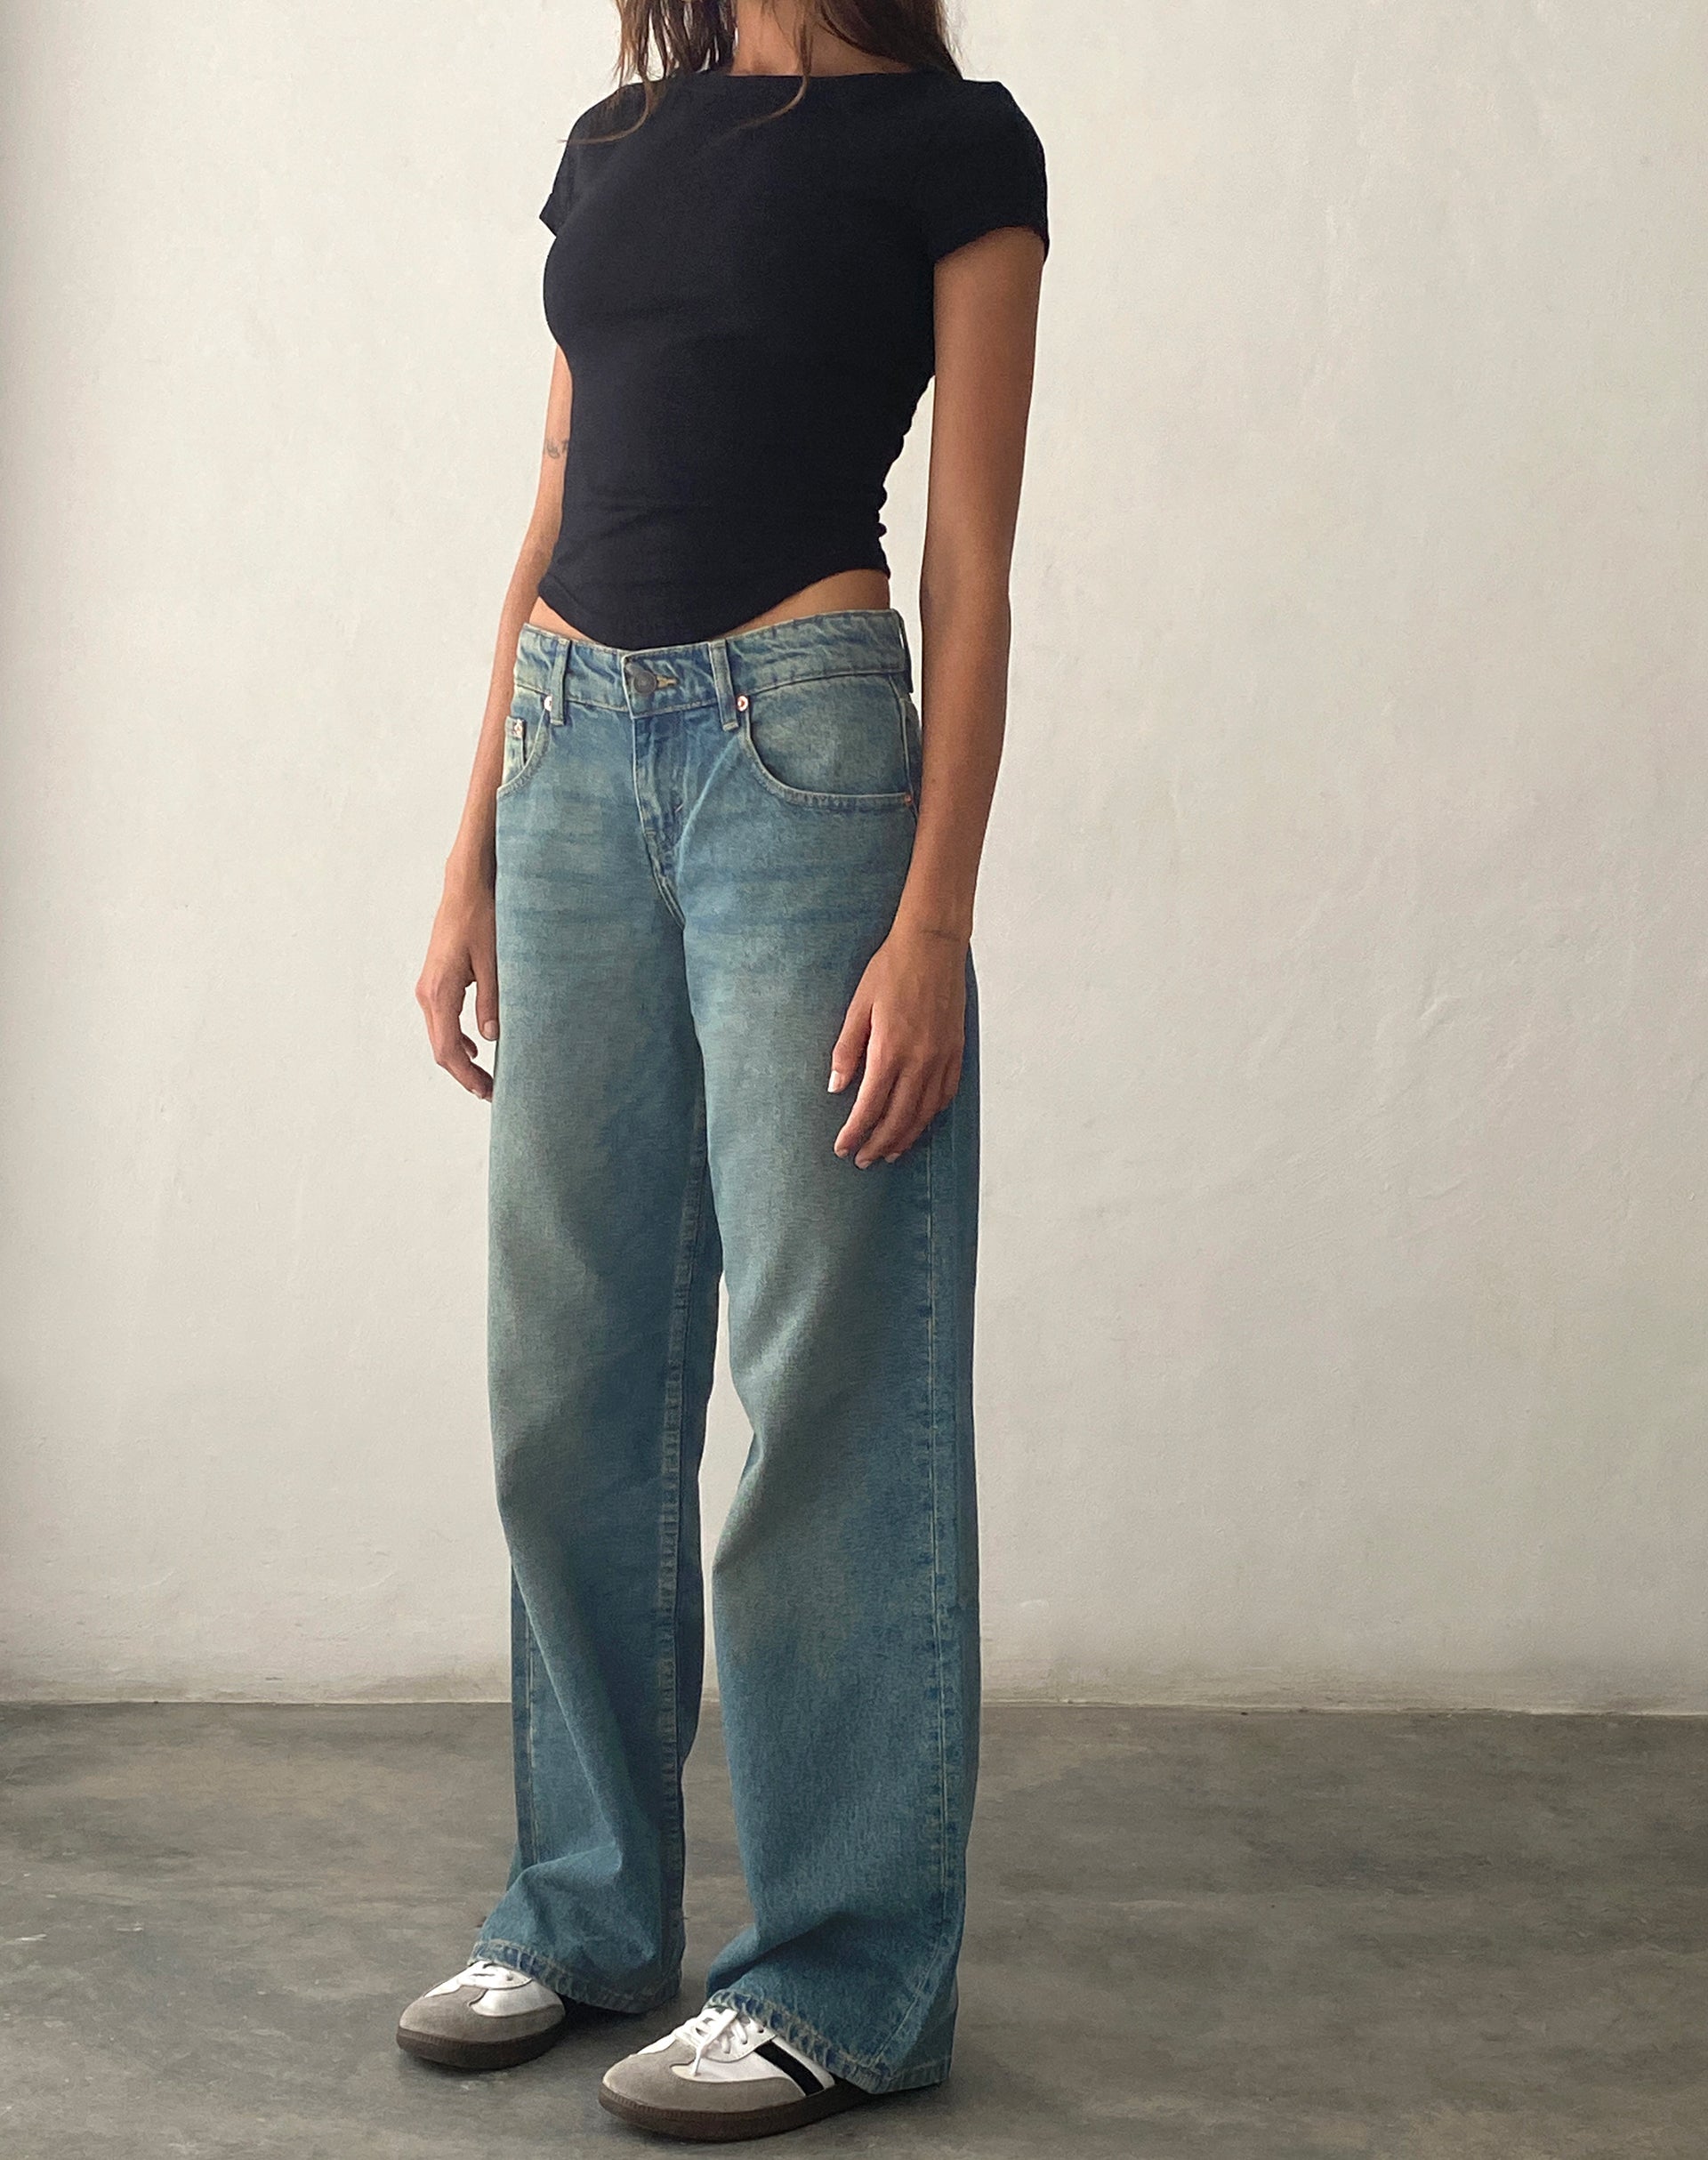 Low Rise Parallel Jeans in 80s Light Blue Wash